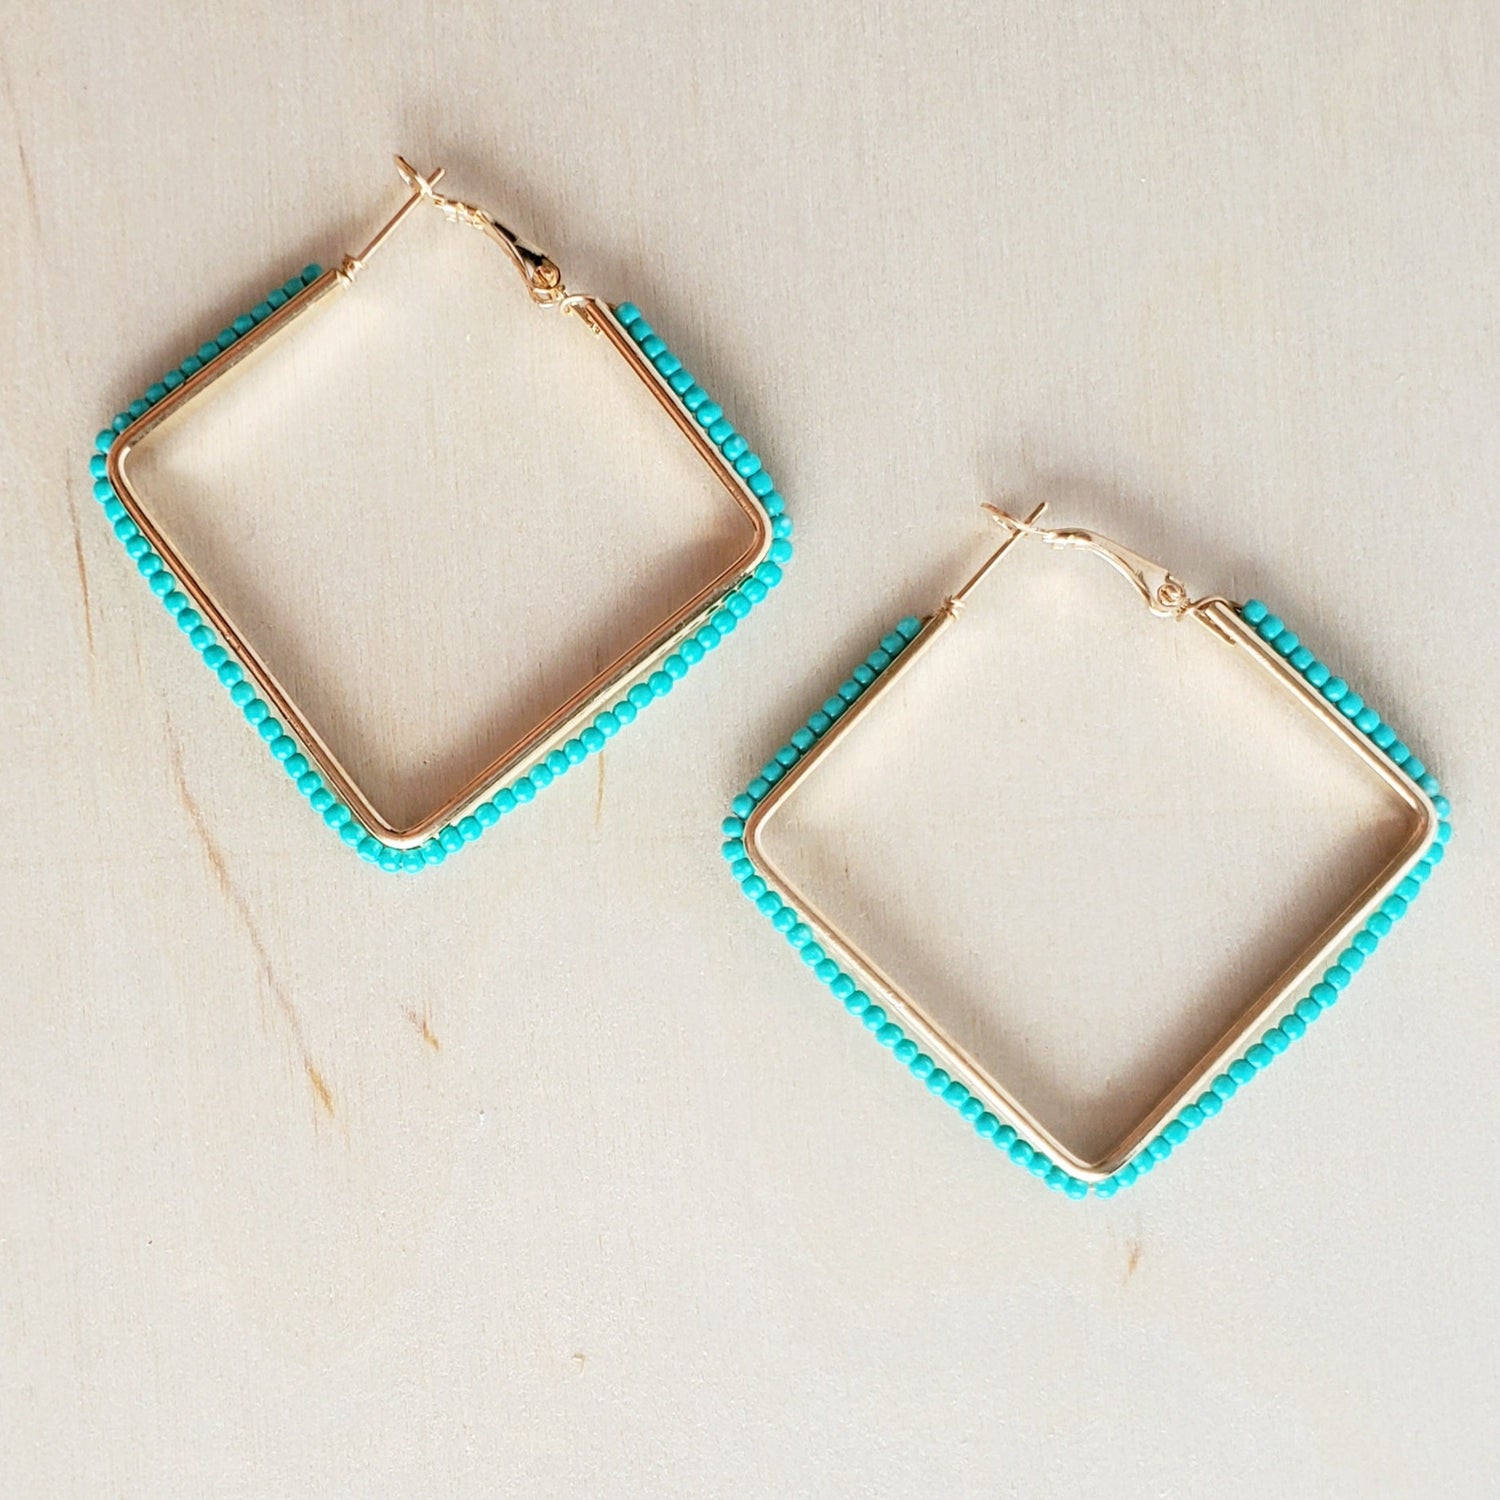 light wood background with square metal hinge back earrings lined with small turquoise beads